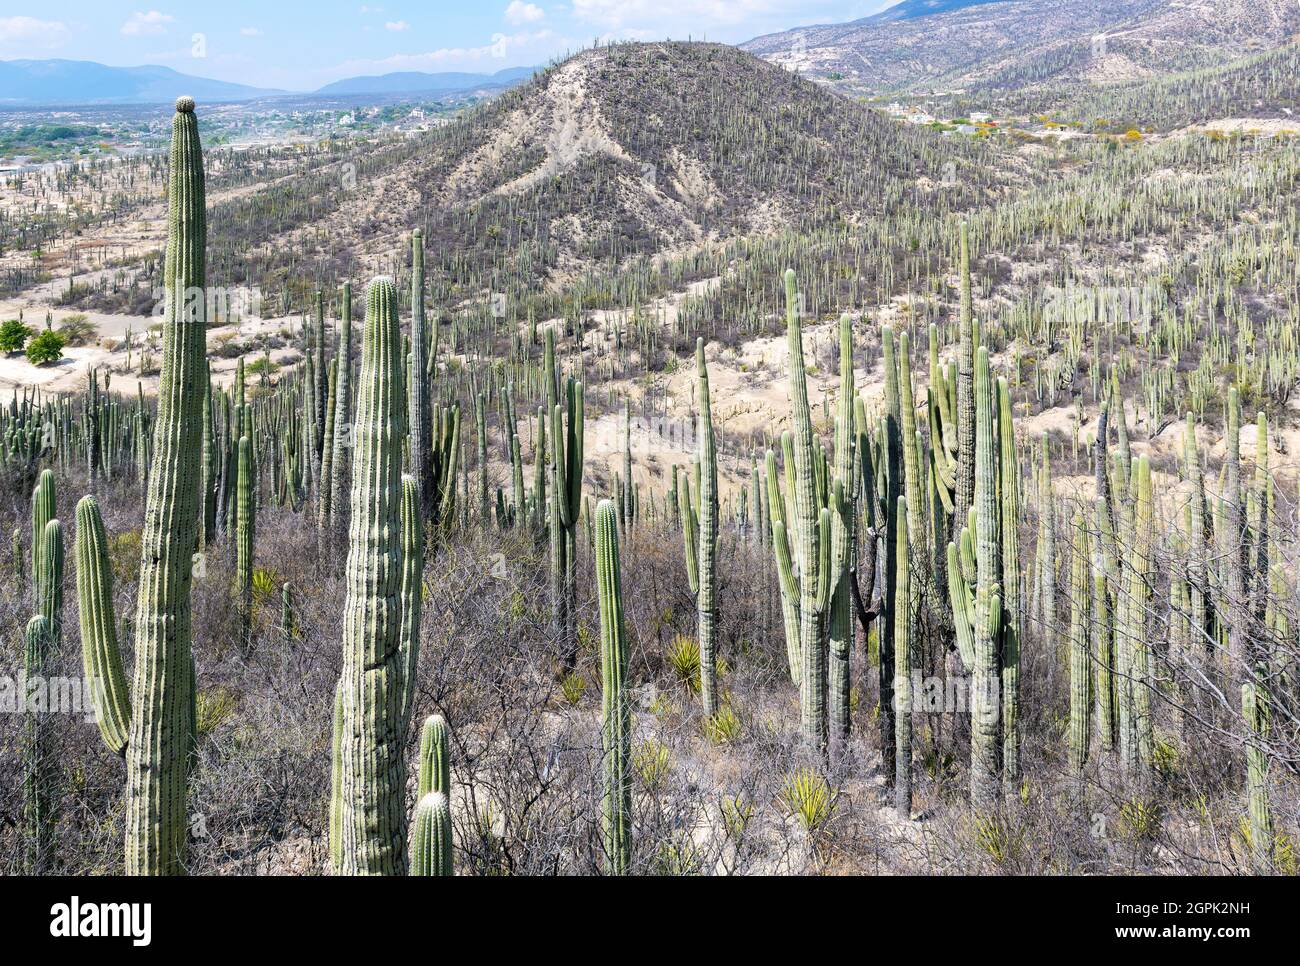 Landscape in the Tehuacan Cuicatlan Biosphere Reserve with columnar cactus (Ceroid cactus), Oaxaca, Mexico. Stock Photo